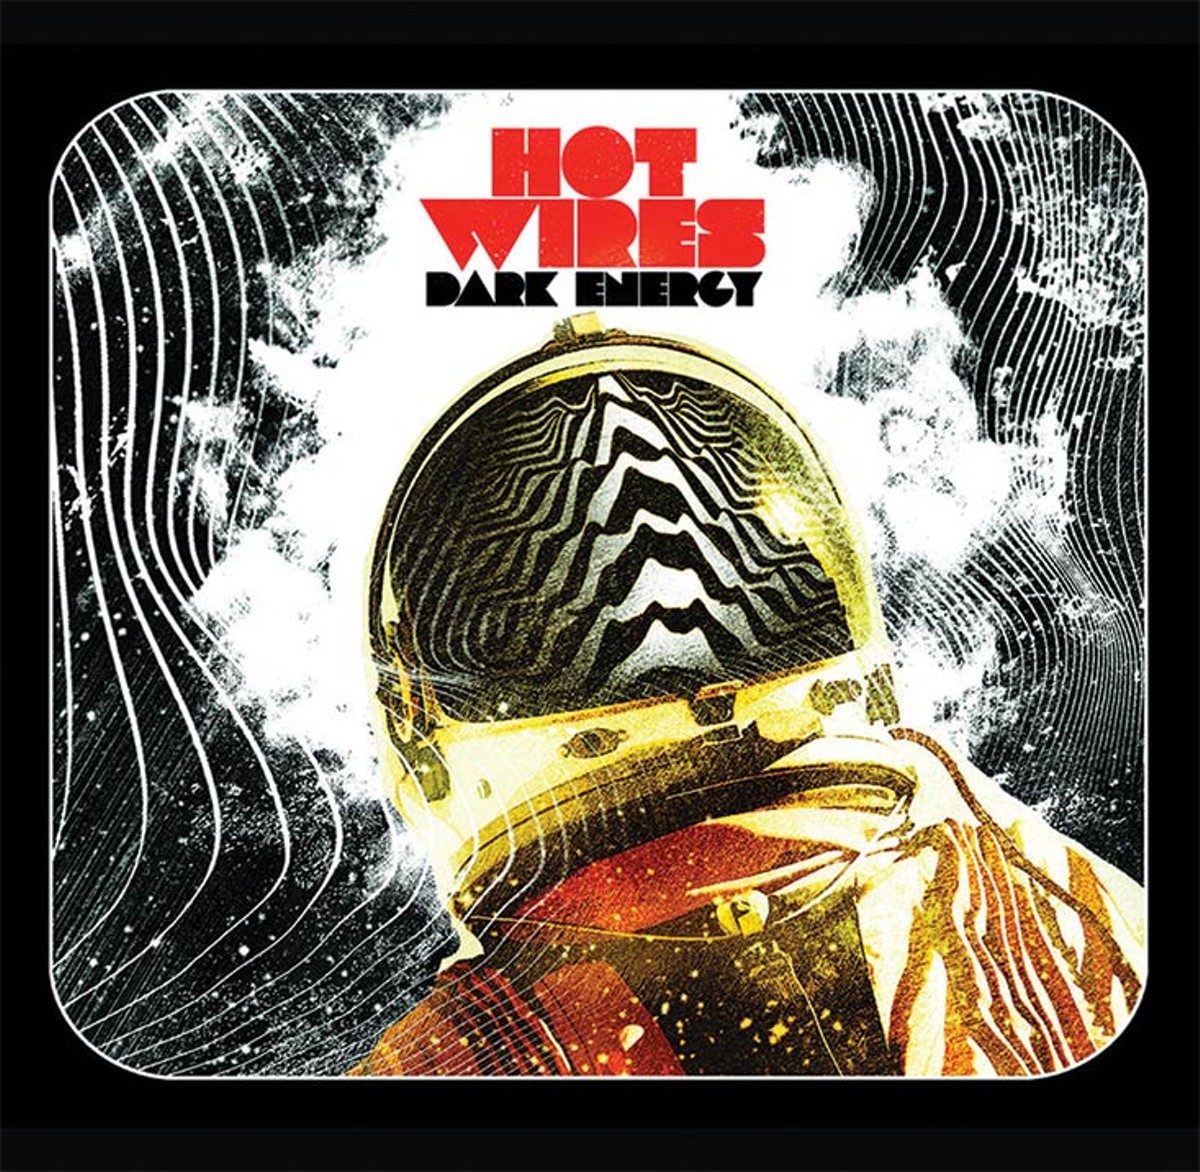 Record Review: Hot Wires &#150; 'Dark Energy'